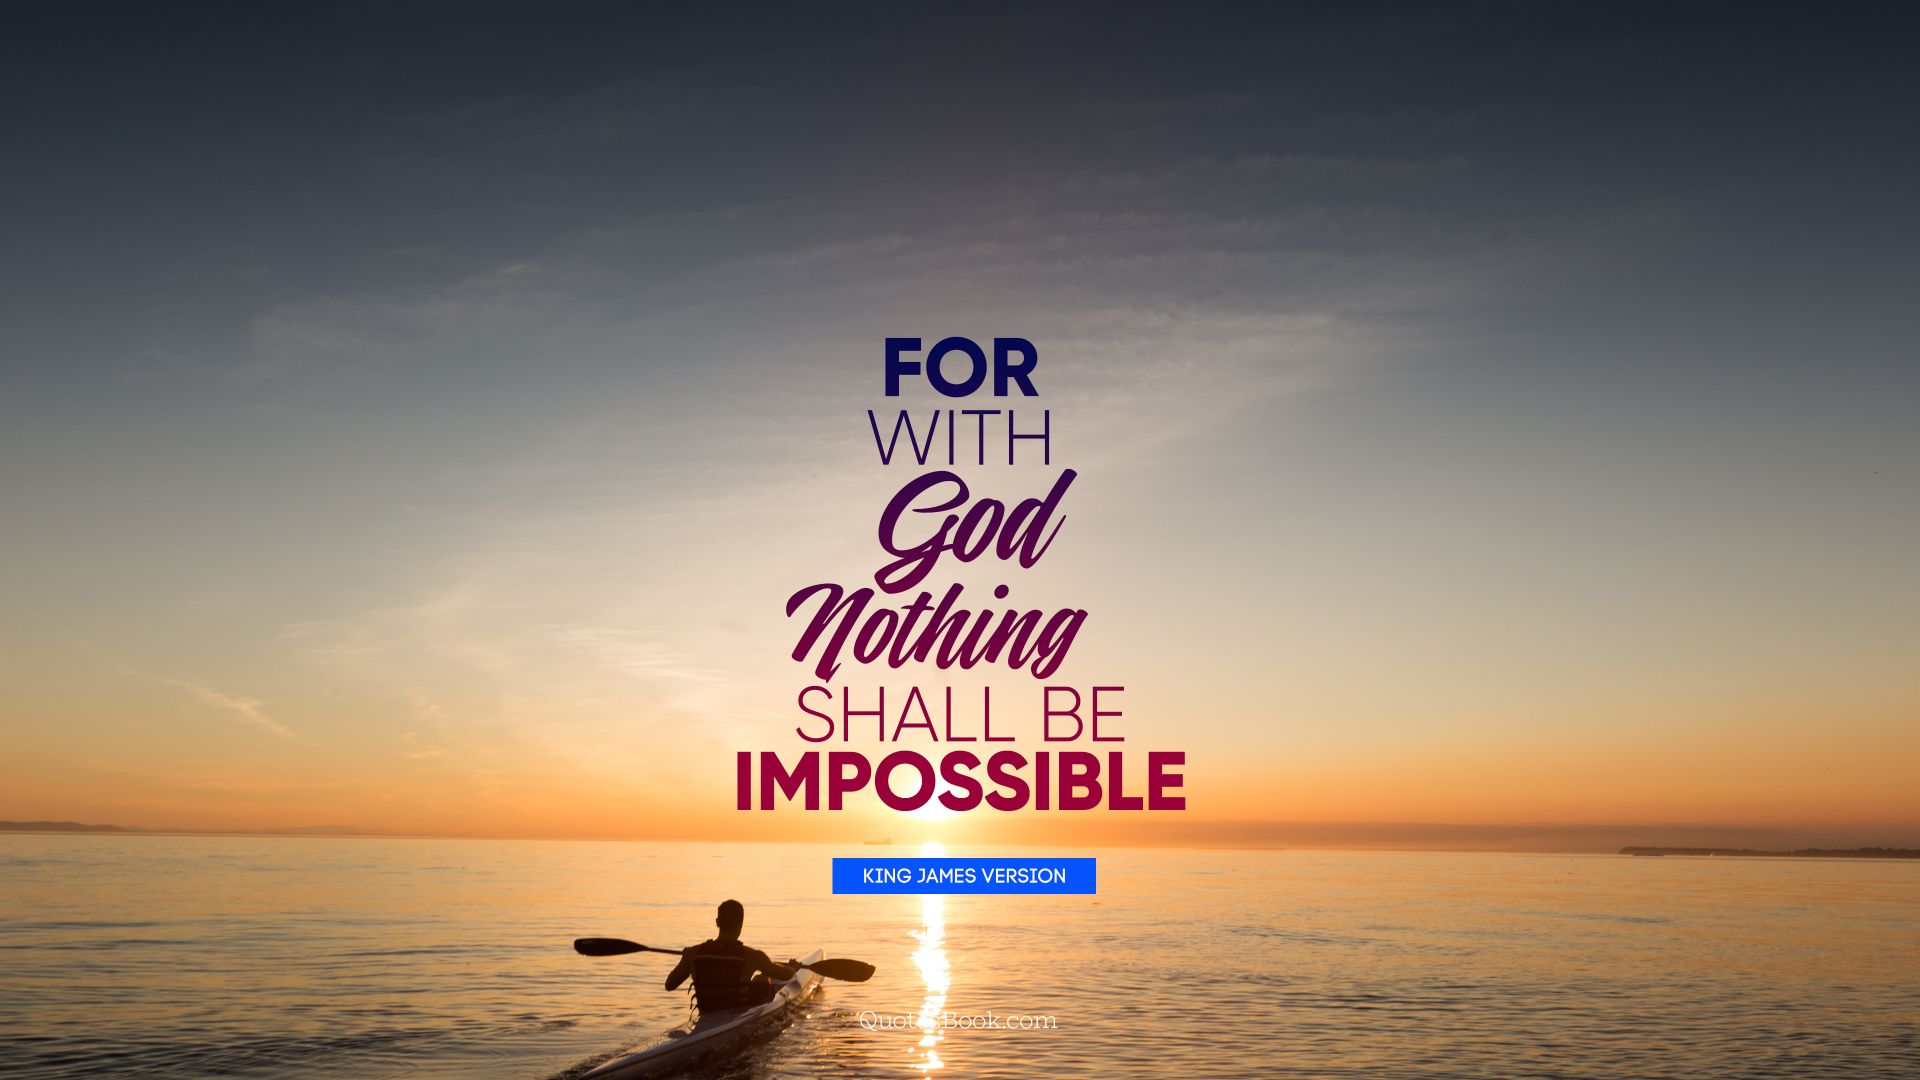 For with God nothing shall be impossible. - Quote by King James Version